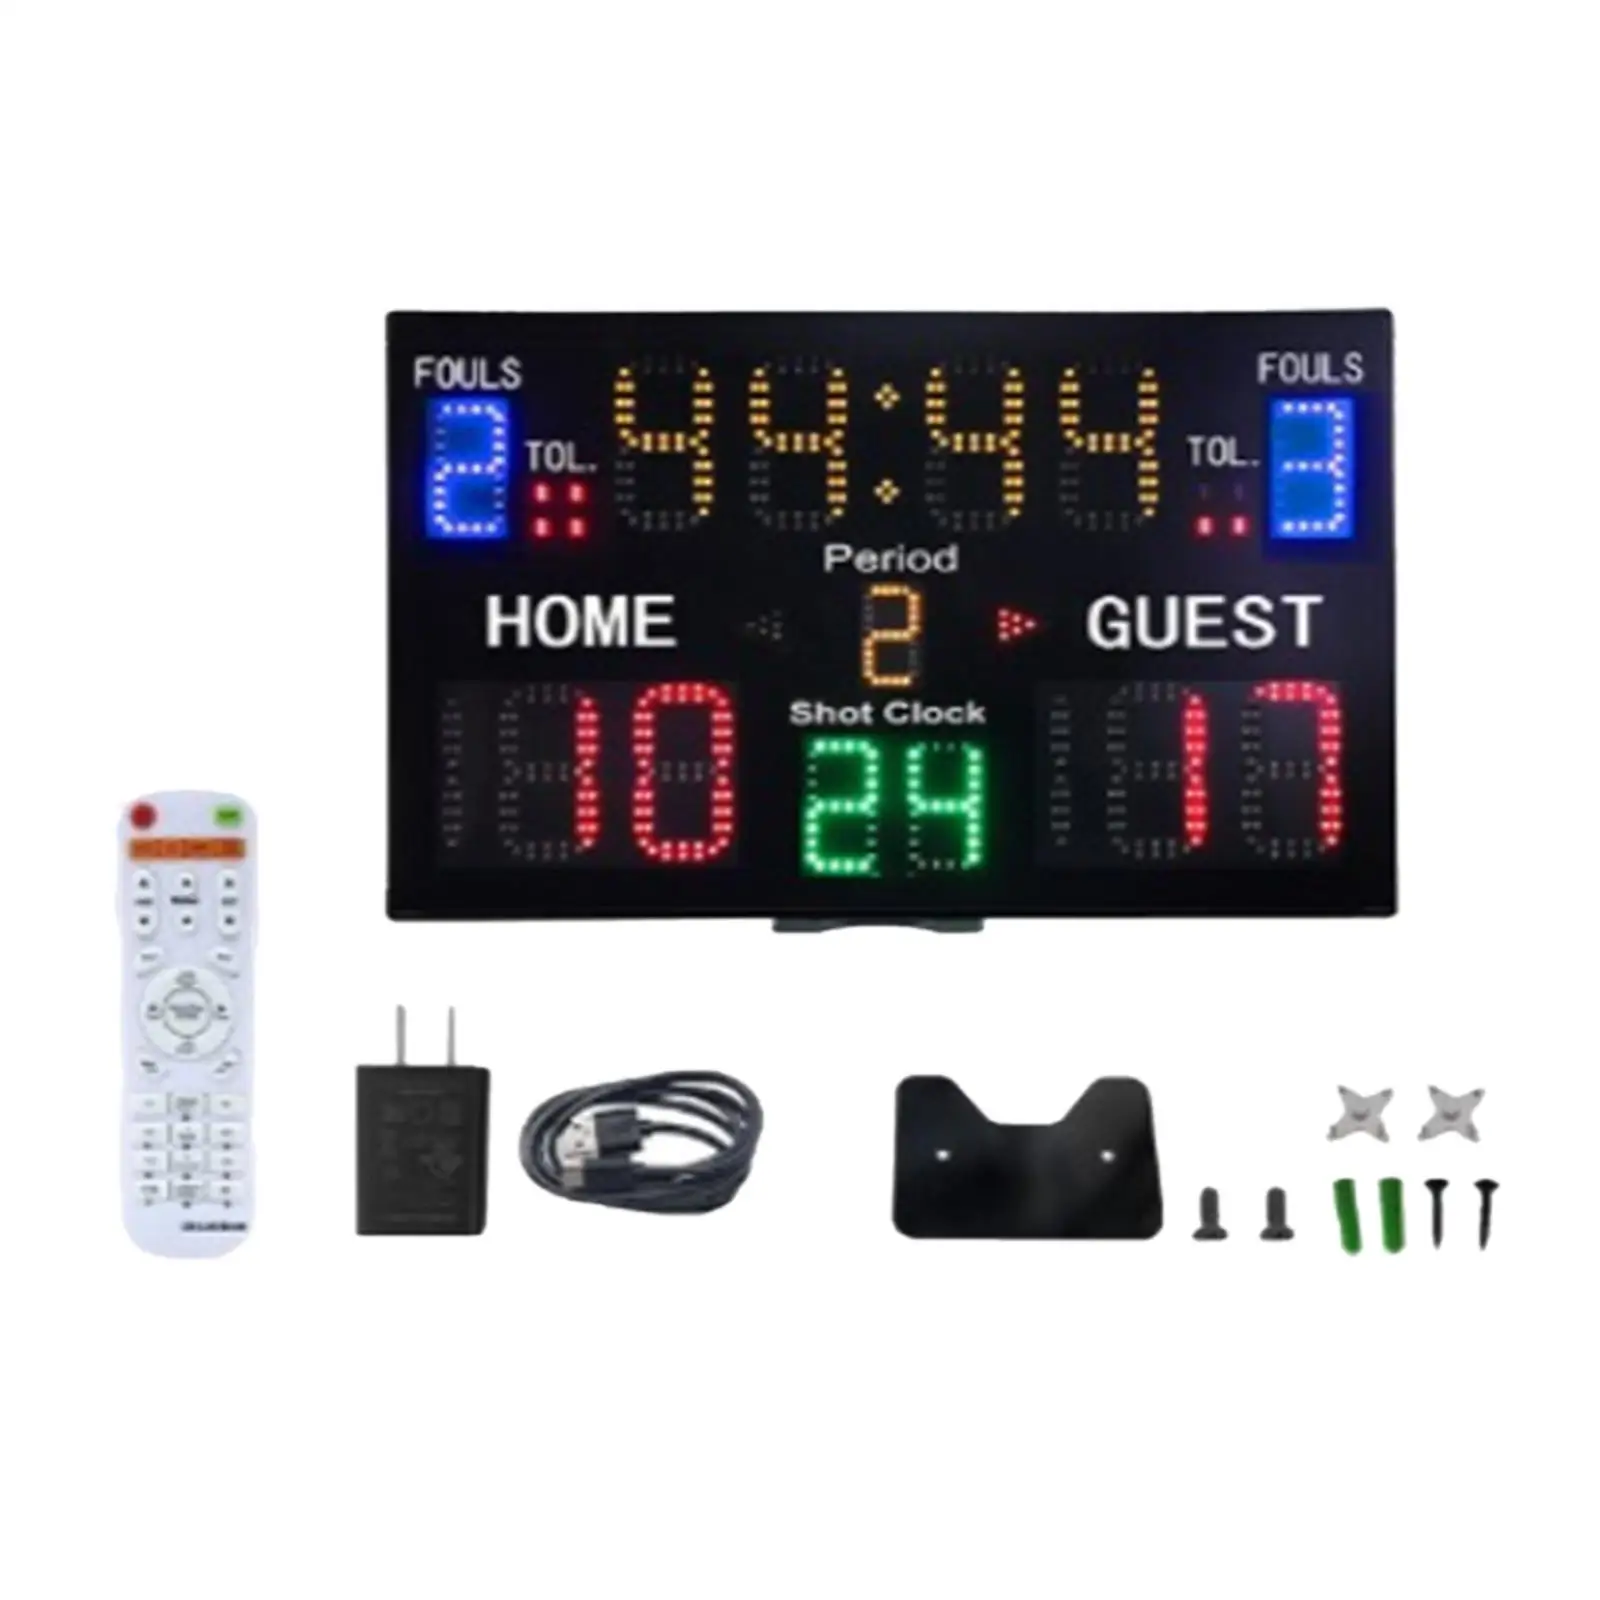 Indoor Basketball Scoreboard Wall Mount Foul Count with Remote Score Timer Electronic Digital Scoreboard for Games Sports Tennis